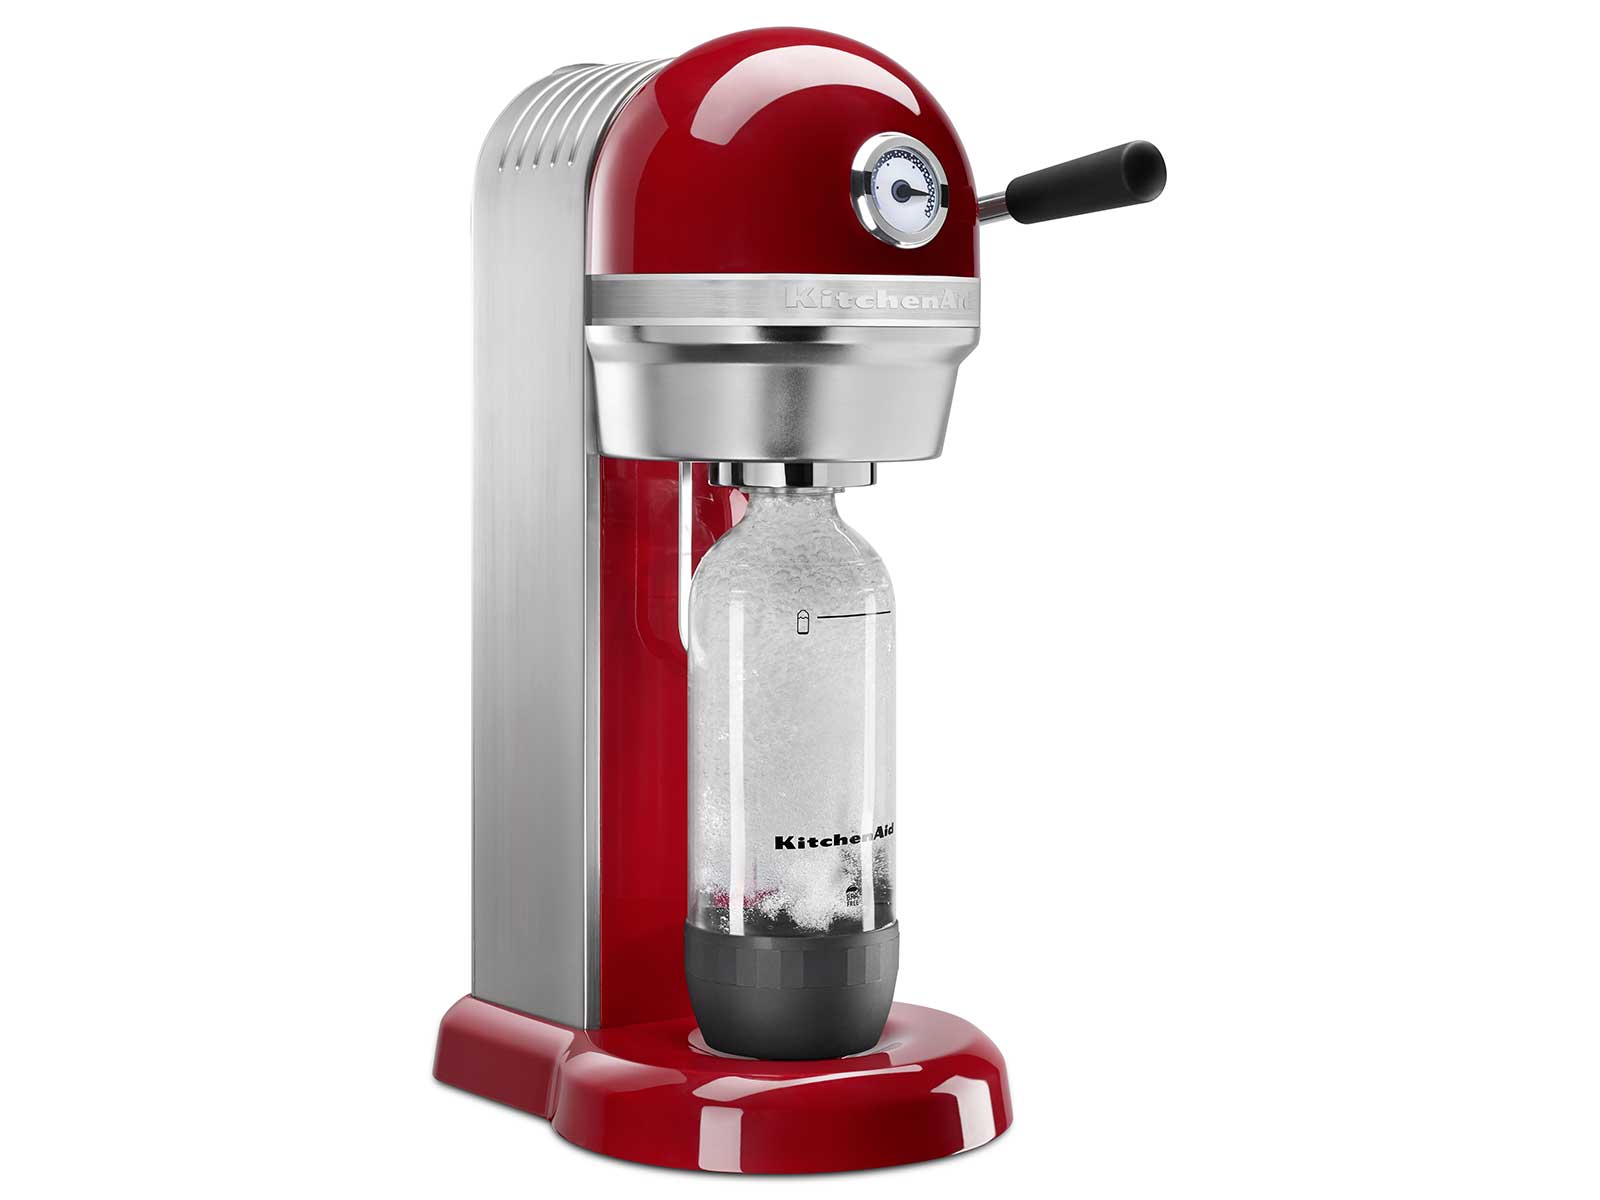 unveils its first all-metal SodaStream model - Appliance Retailer